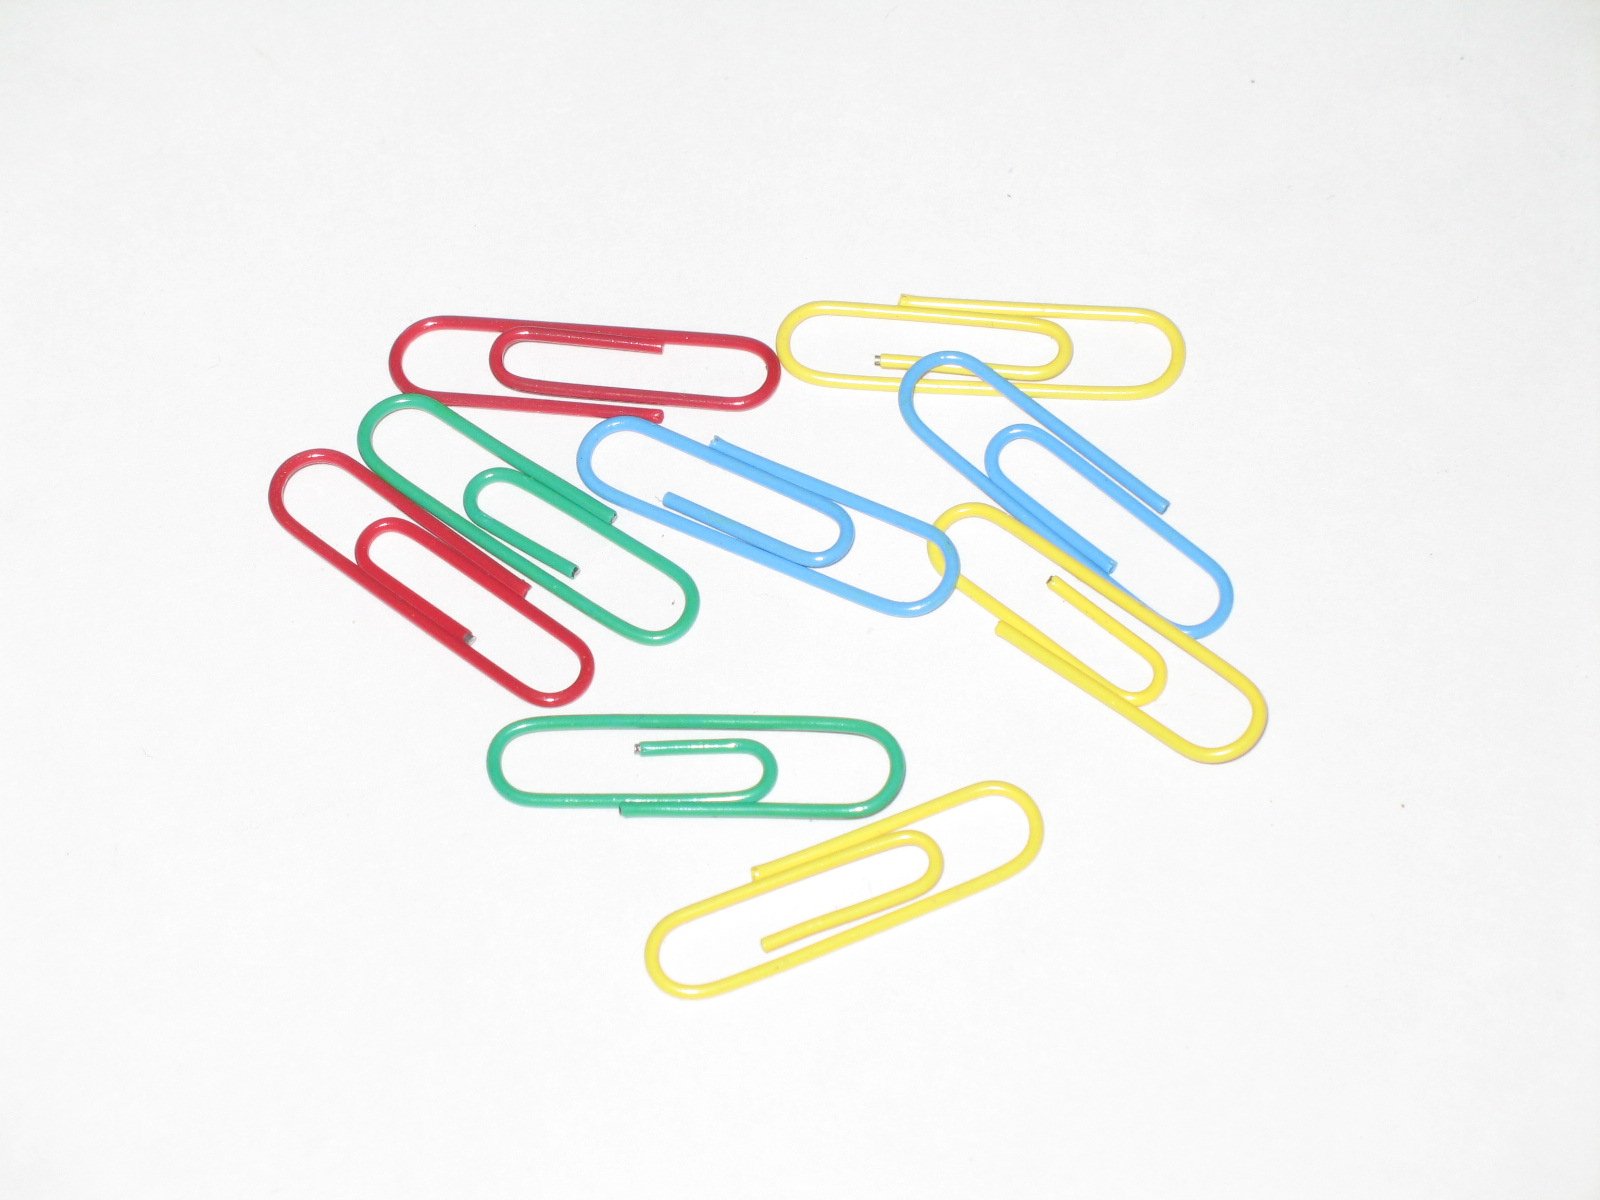 a white background has several rainbow colored paper clips with thumb tips